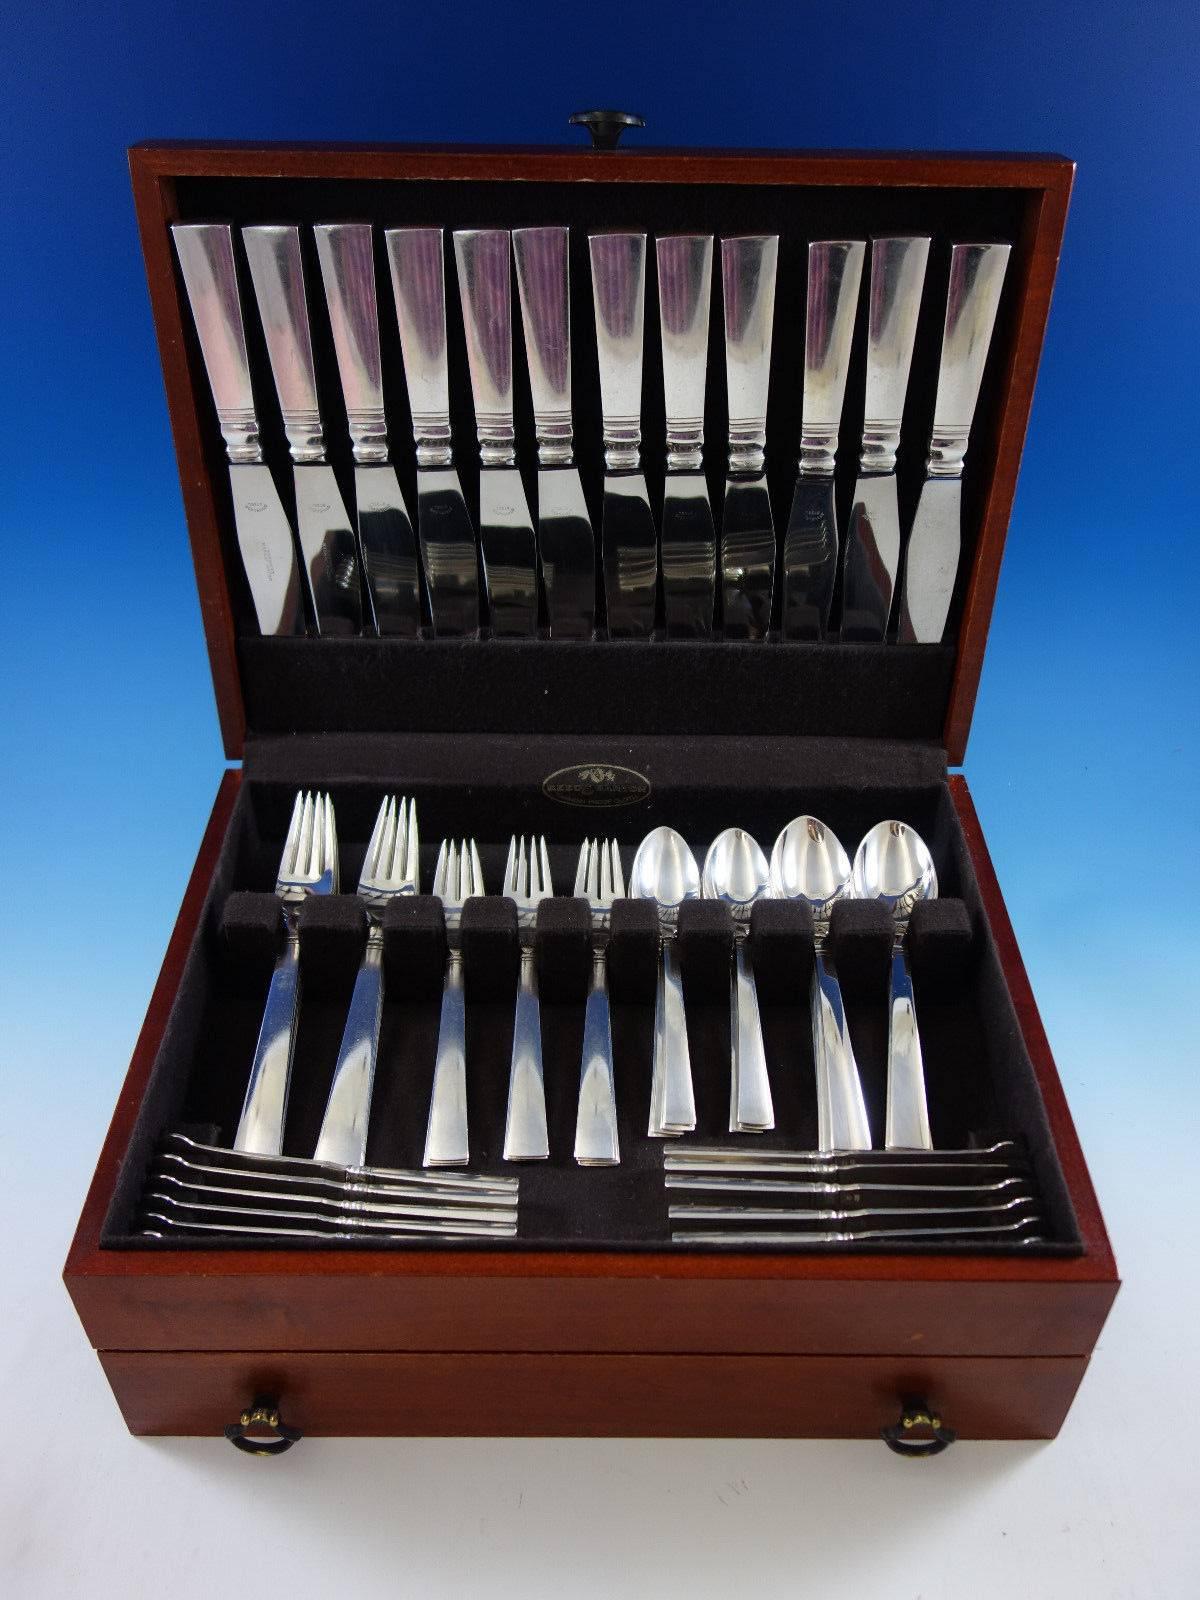 Blok by Georg Jensen sterling silver dinner size flatware set - 72 pieces. This set has scarce extra large dinner knives and forks! This set includes: 

12 extra large dinner knives, 9 3/4